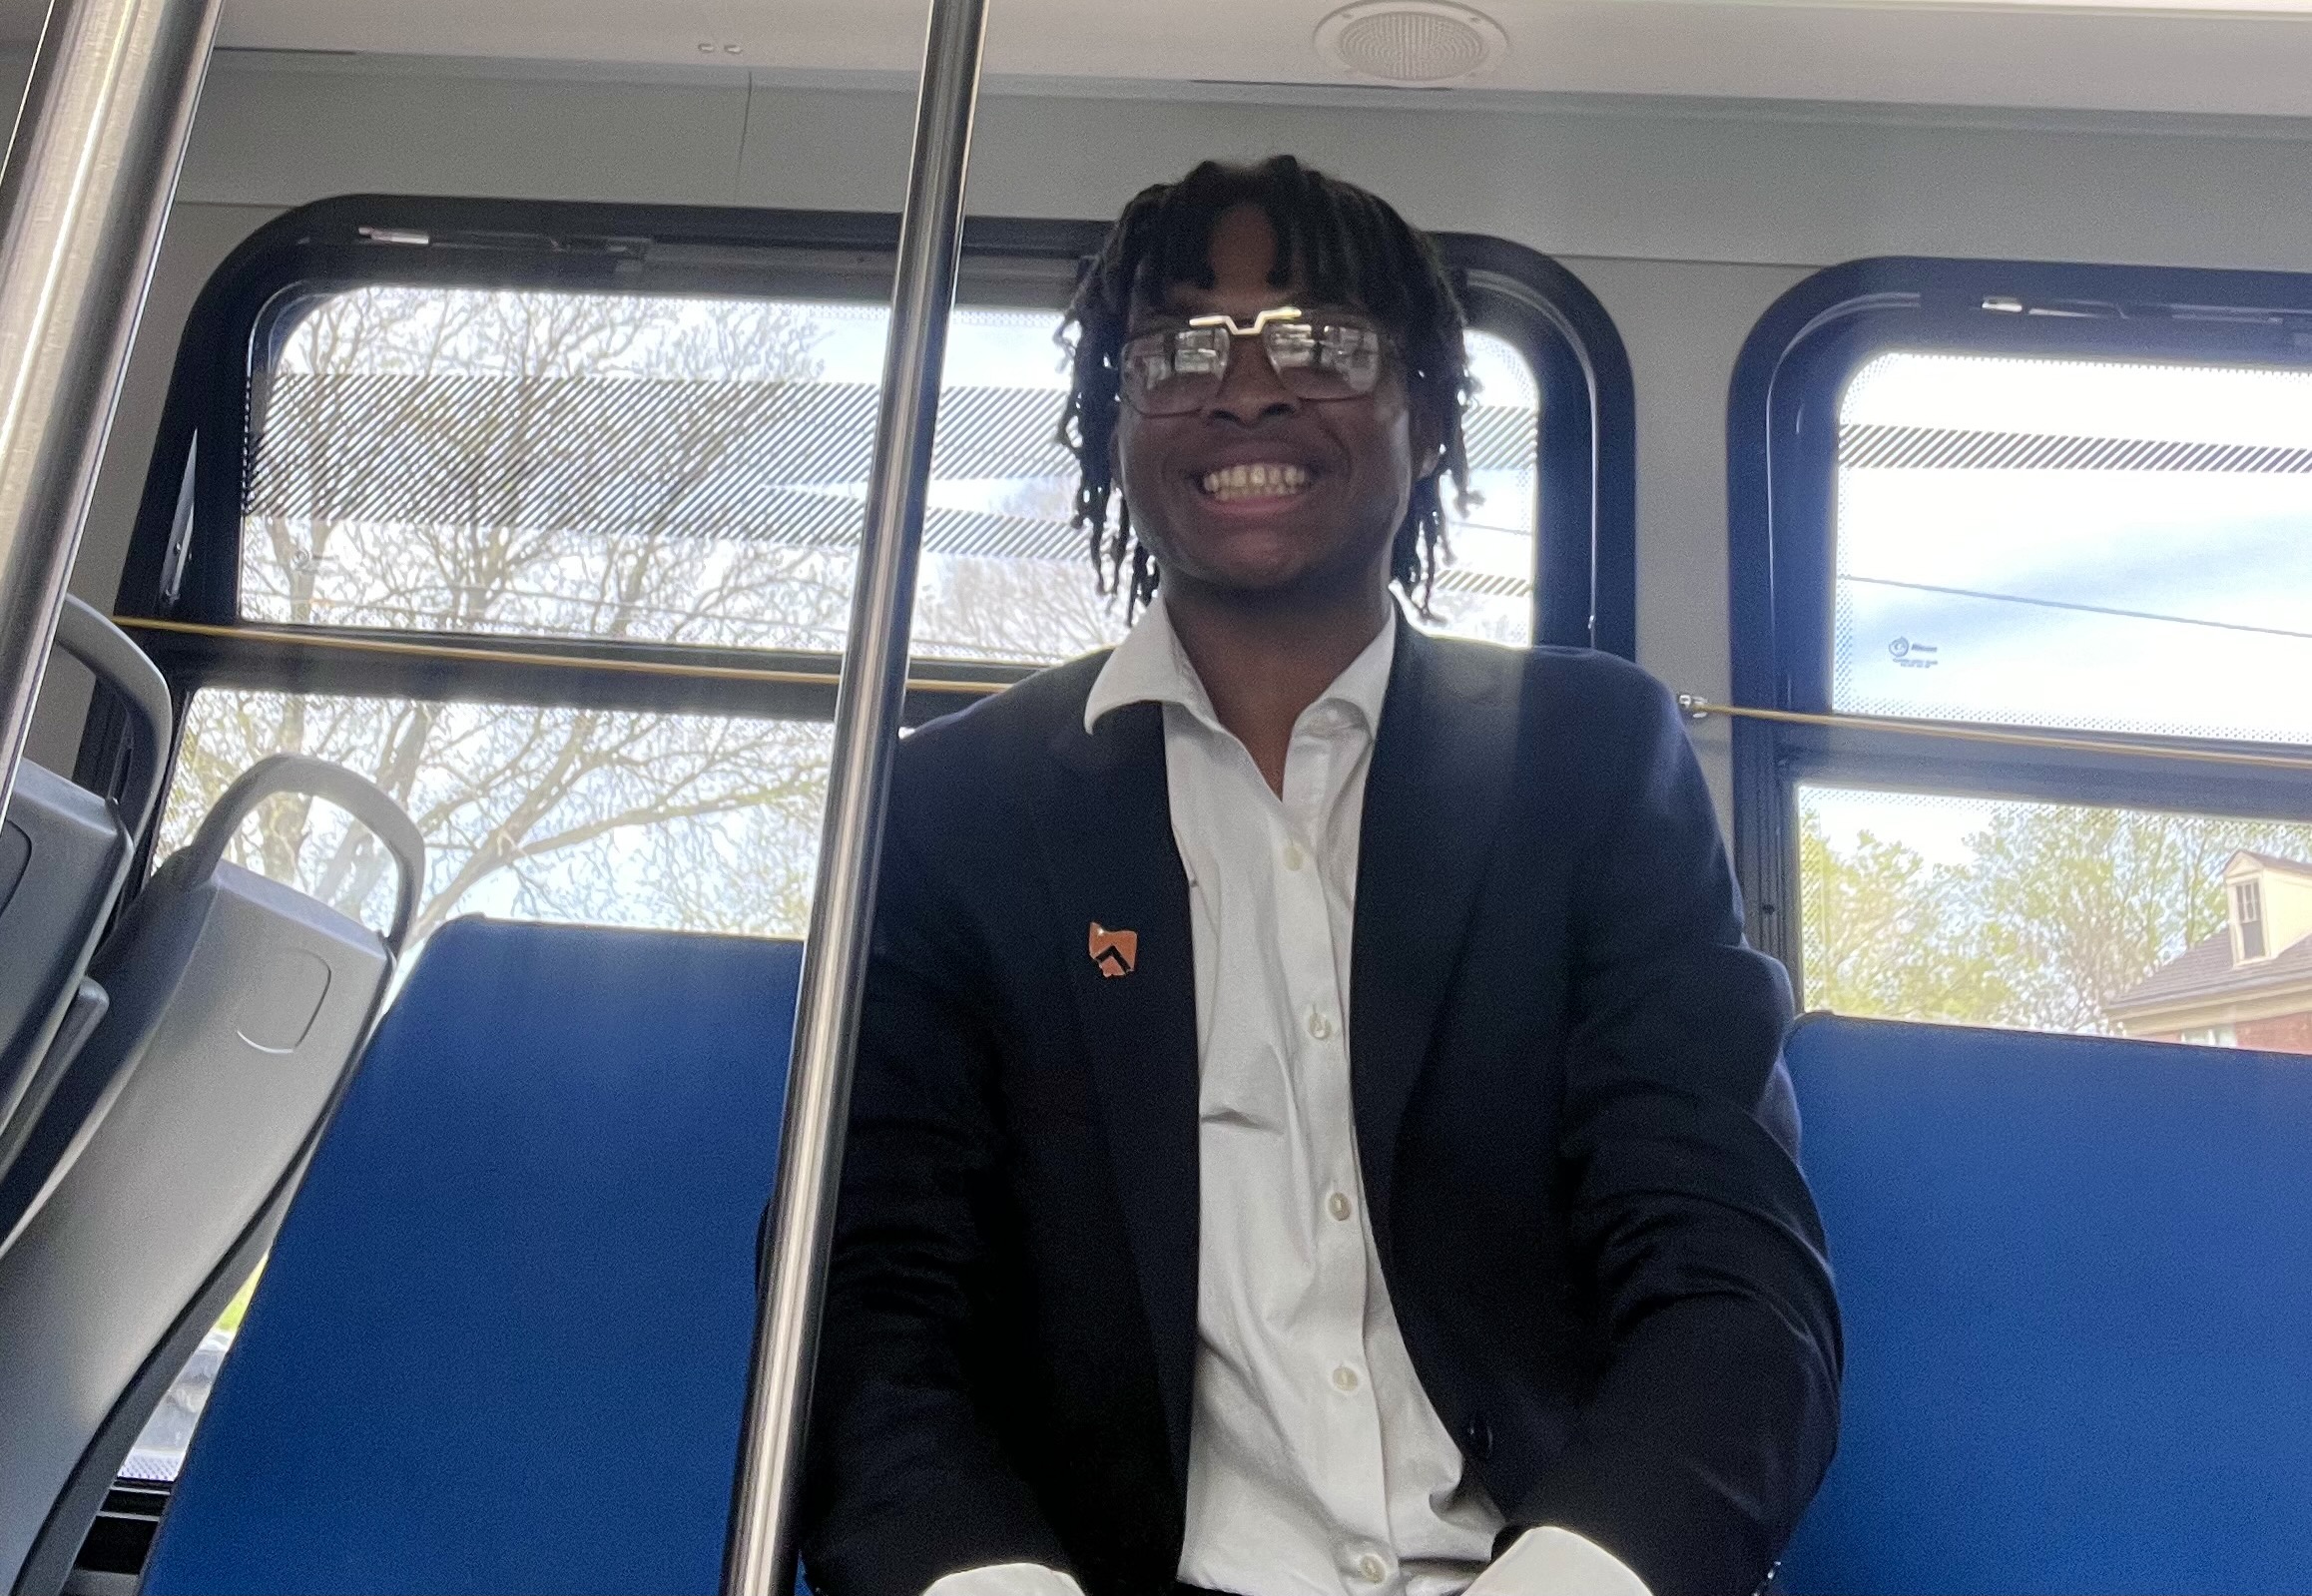 A young man sits on a blue bus seat in a suit jacket and is smiling.